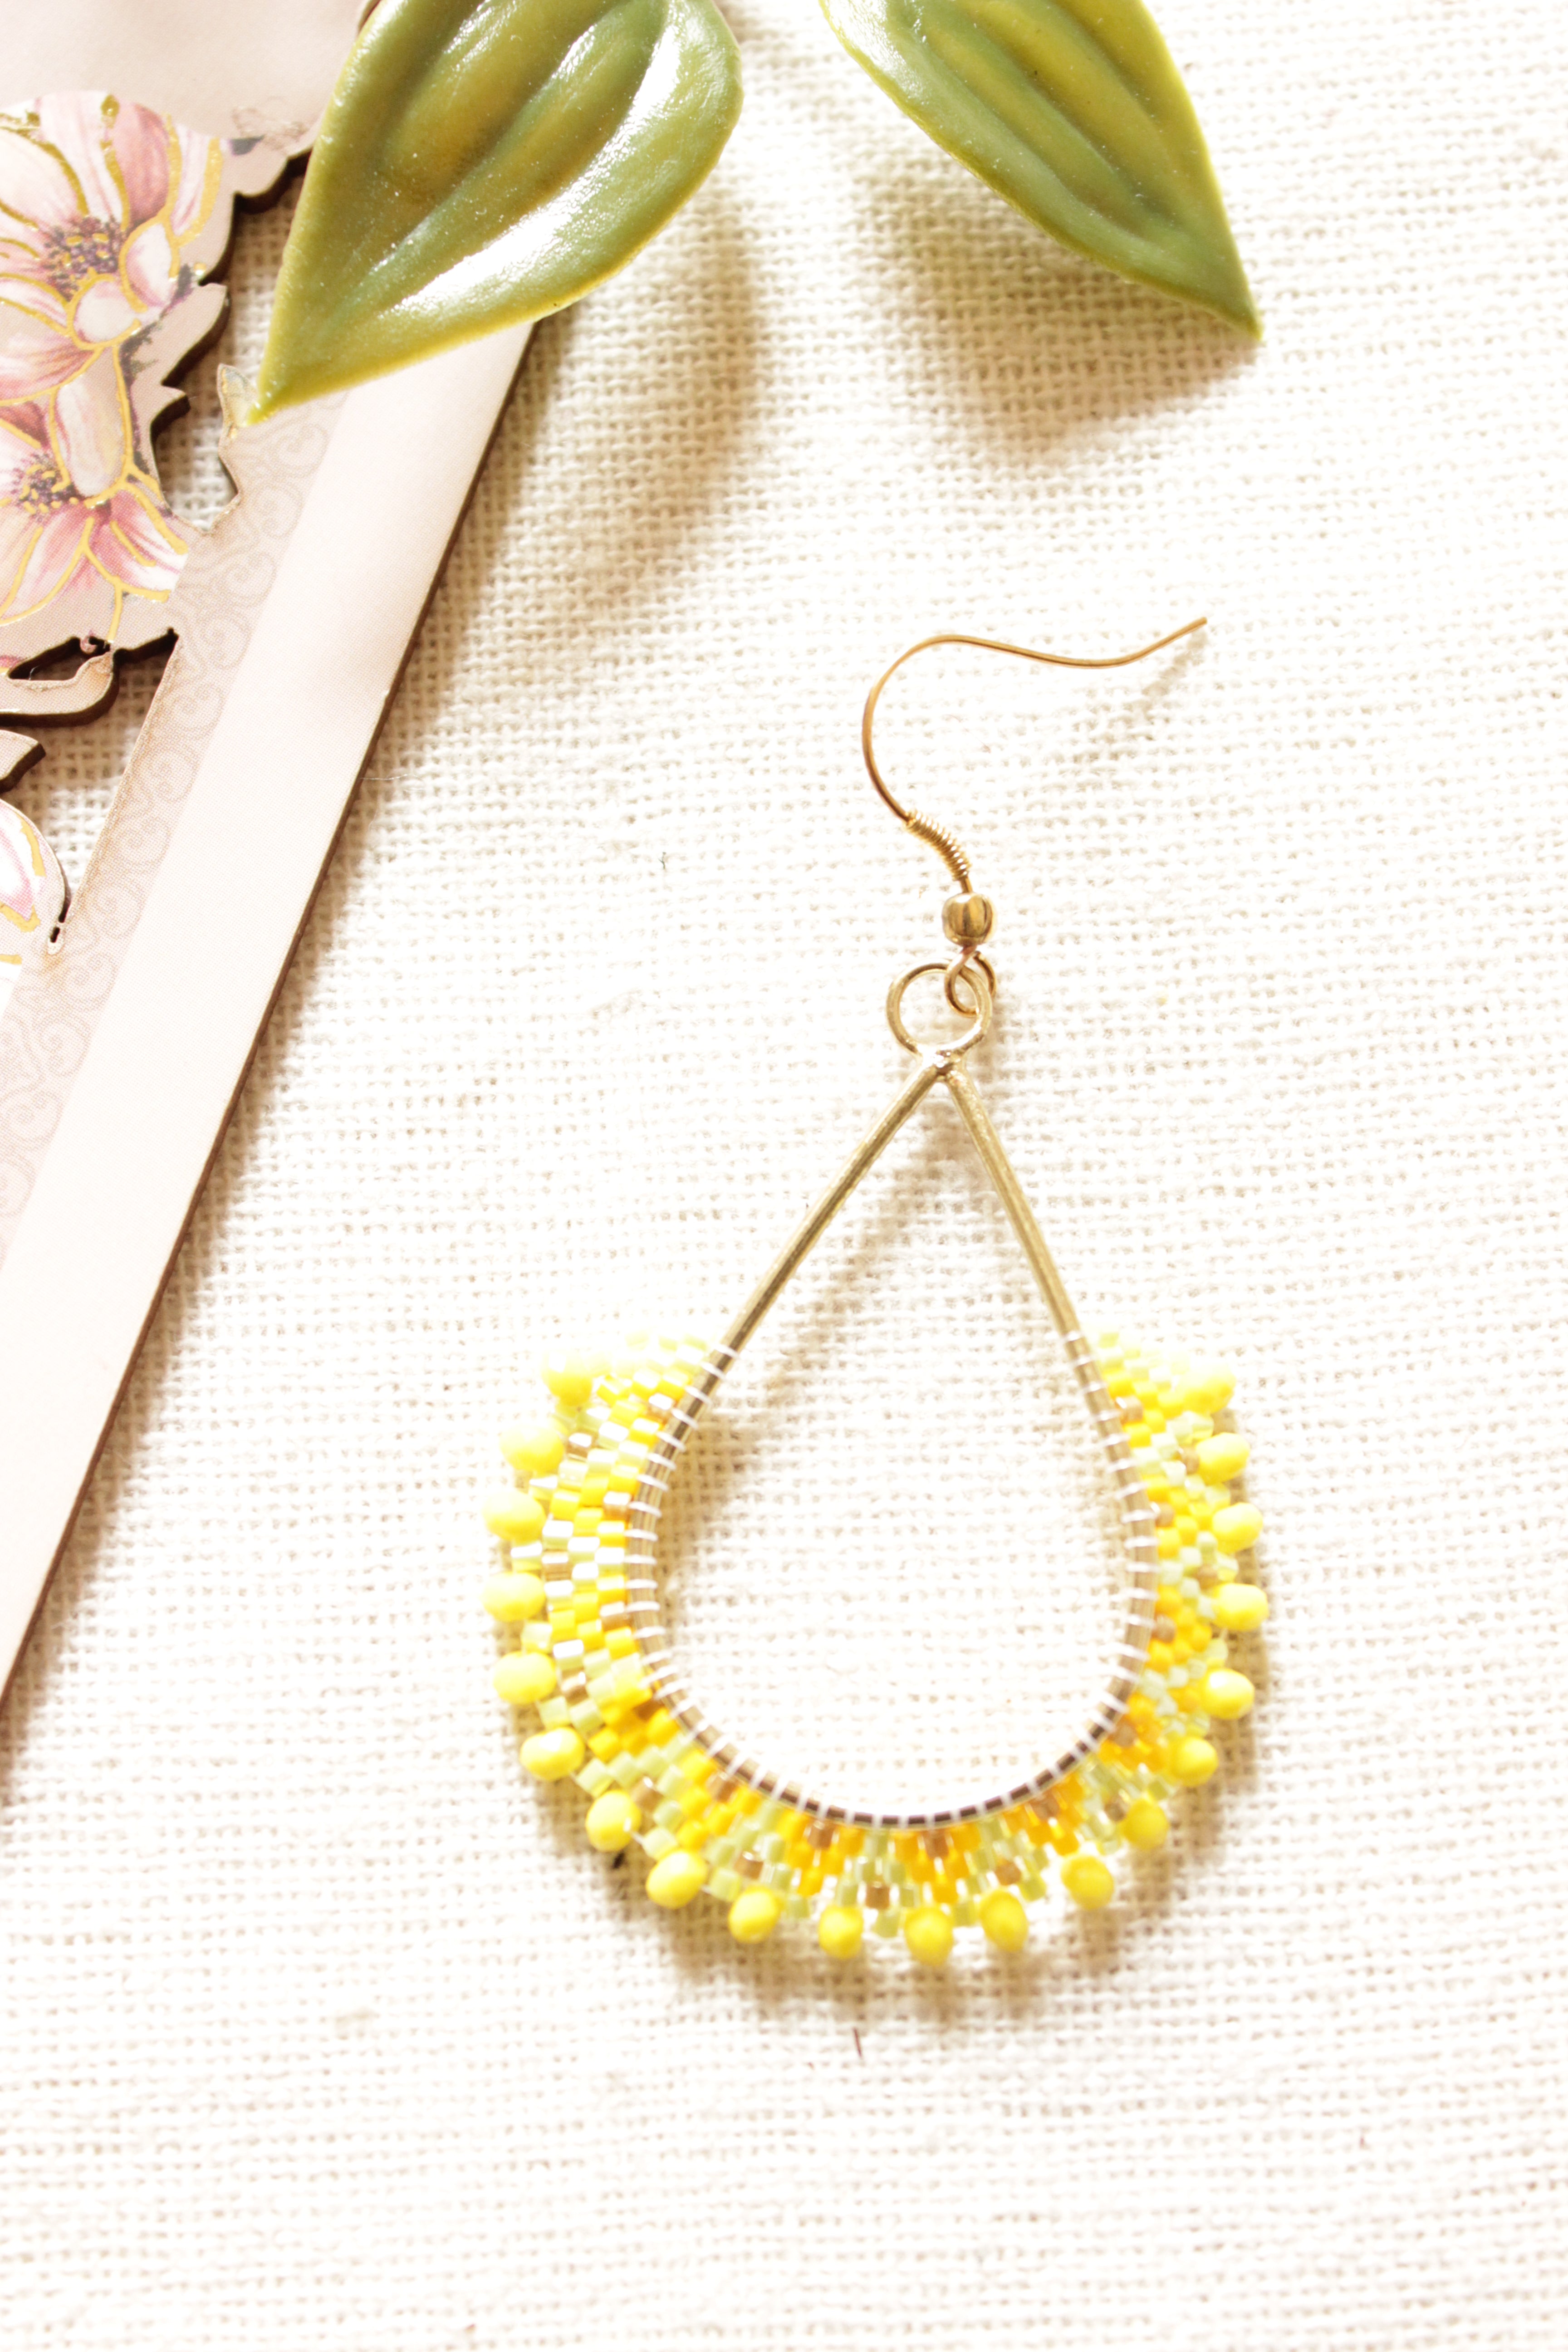 Shades of Yellow and Gold Seed Beads Handmade Beaded Tear Drop Earrings